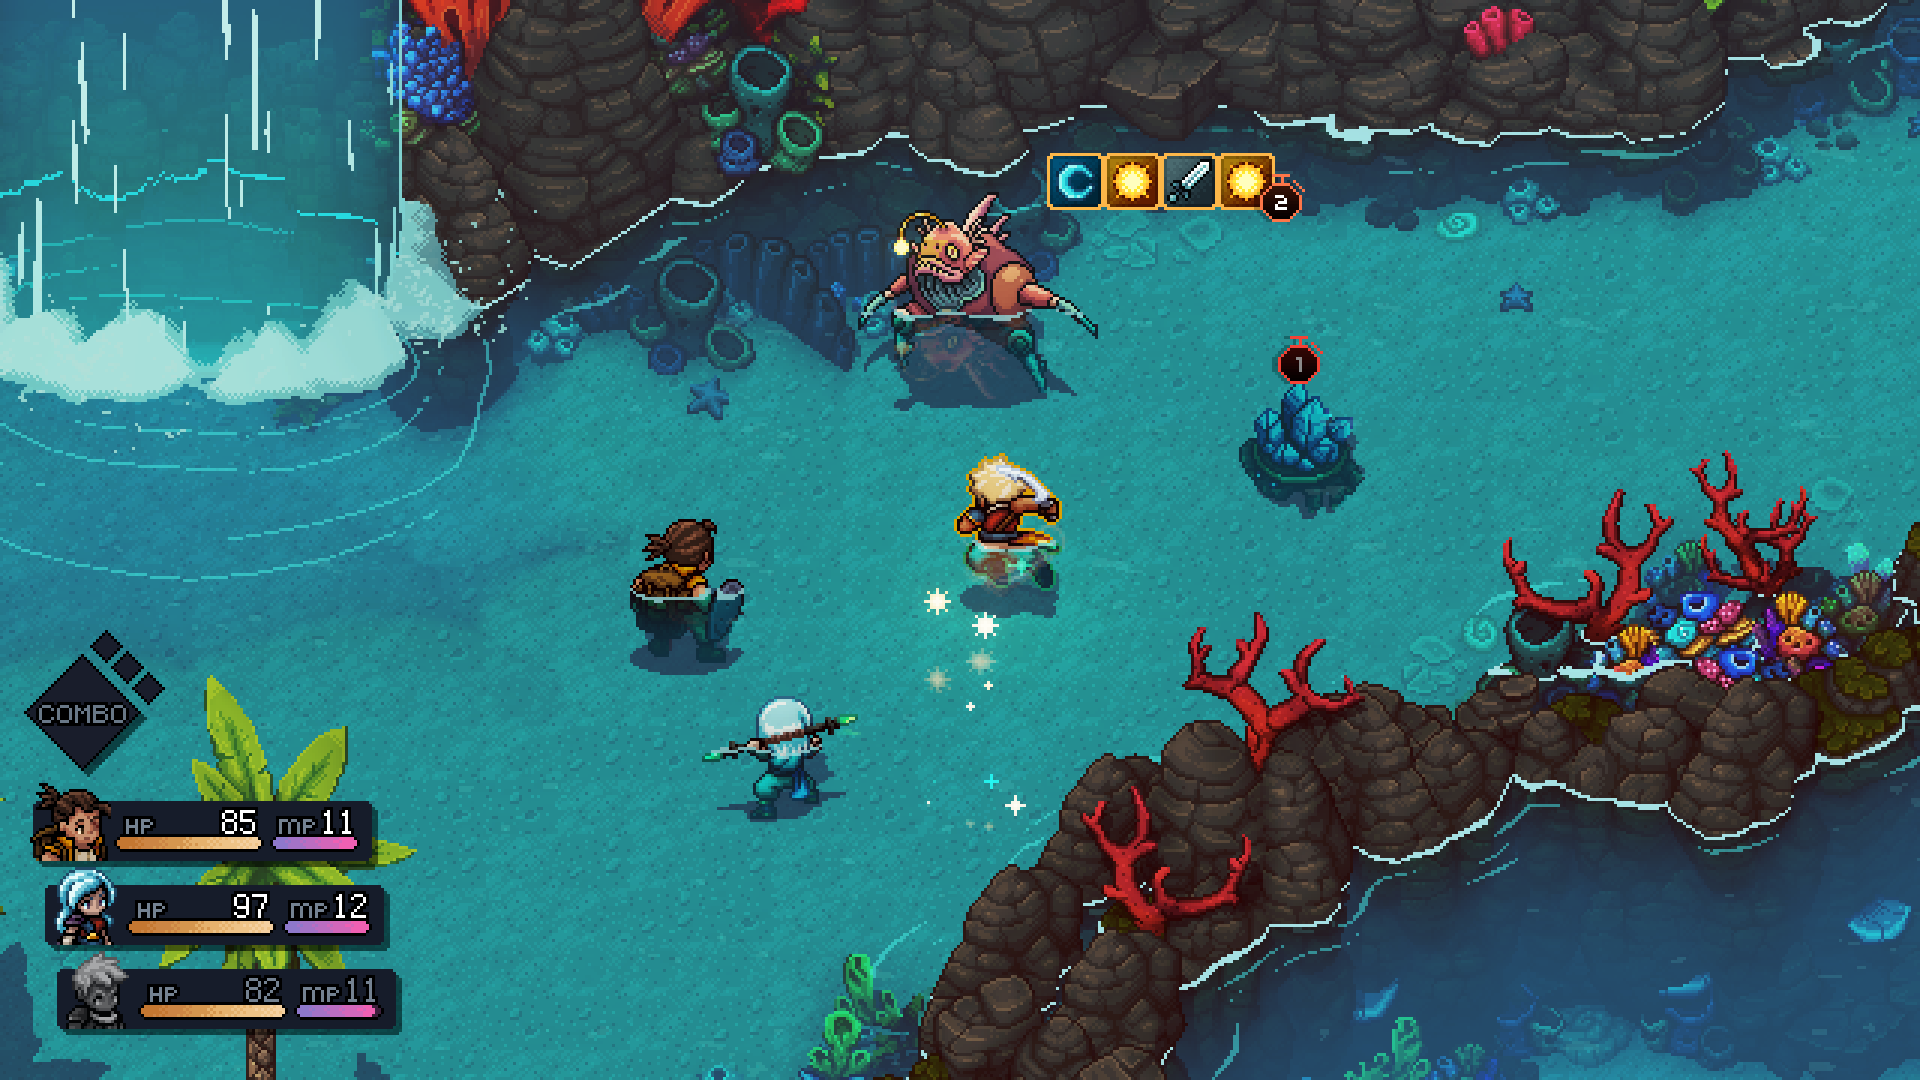 Sea of Stars Release Date, Gameplay, Story, and More - News